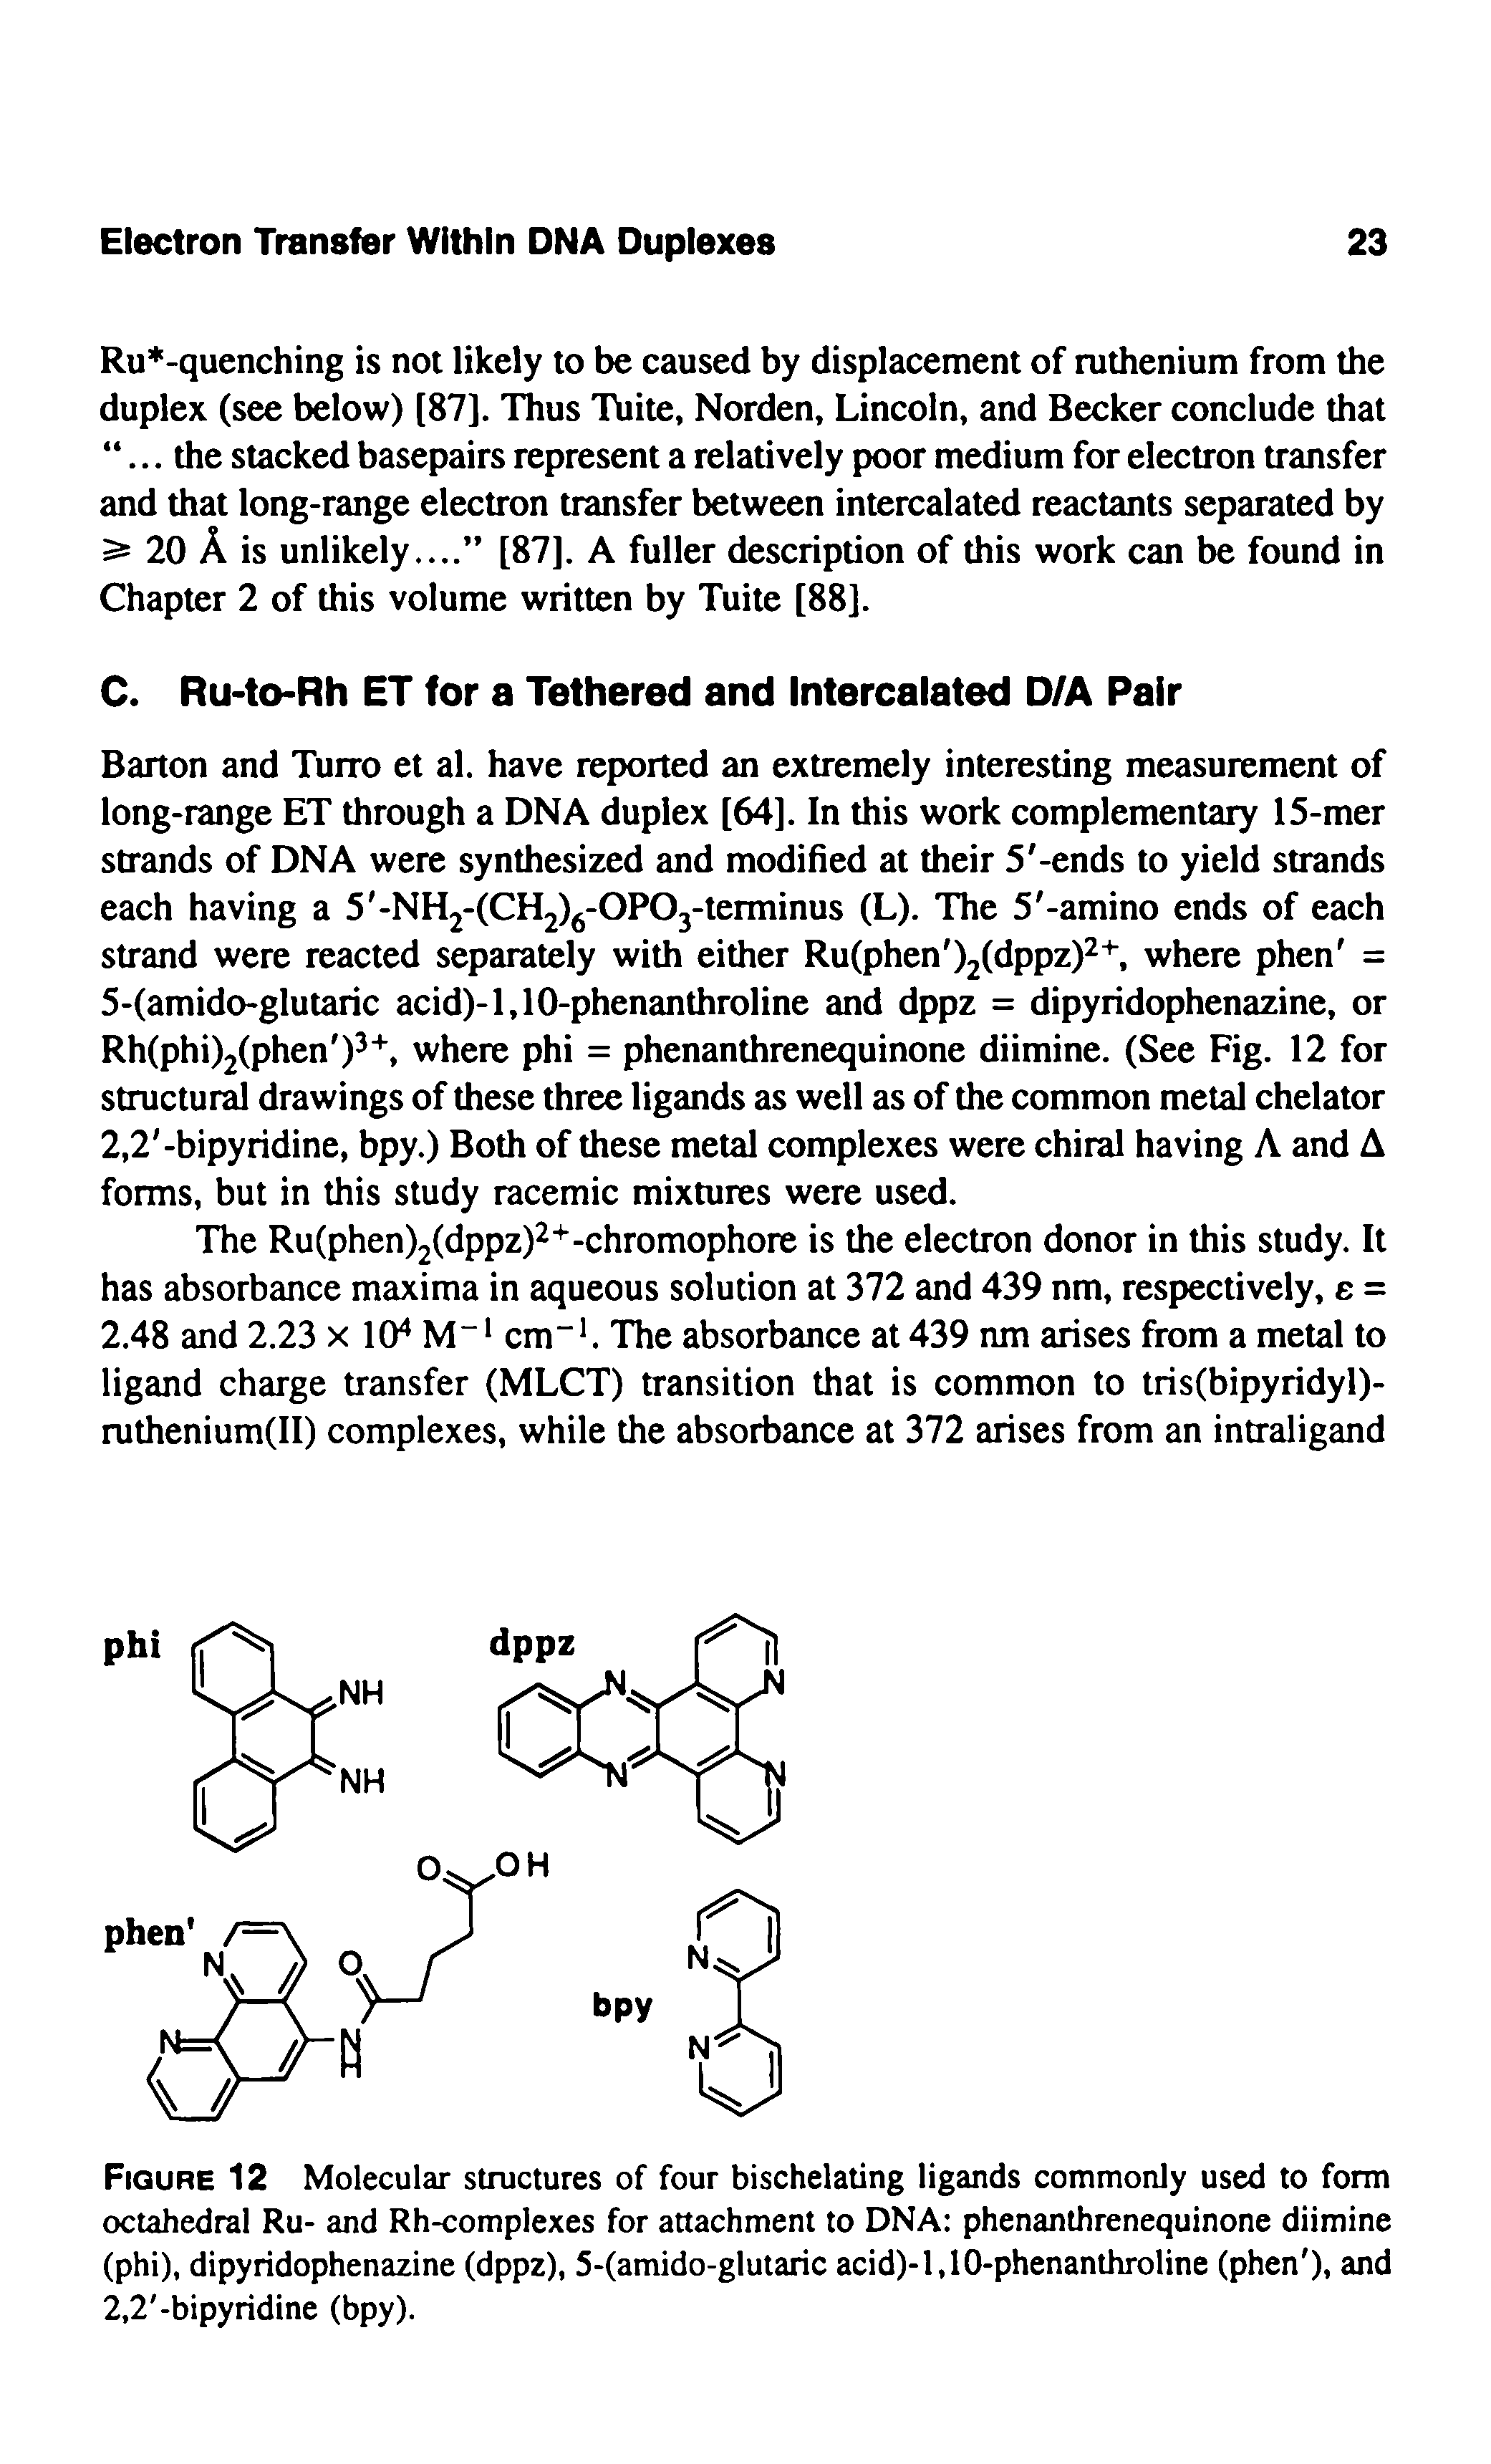 Figure 12 Molecular structures of four bischelating ligands commonly used to form octahedral Ru- and Rh-complexes for attachment to DNA phenanthrenequinone diimine (phi), dipyridophenazine (dppz), 5-(amido-glutaric acid)-l,10-phenanthroline (phen ), and 2,2 -bipyridine (bpy).